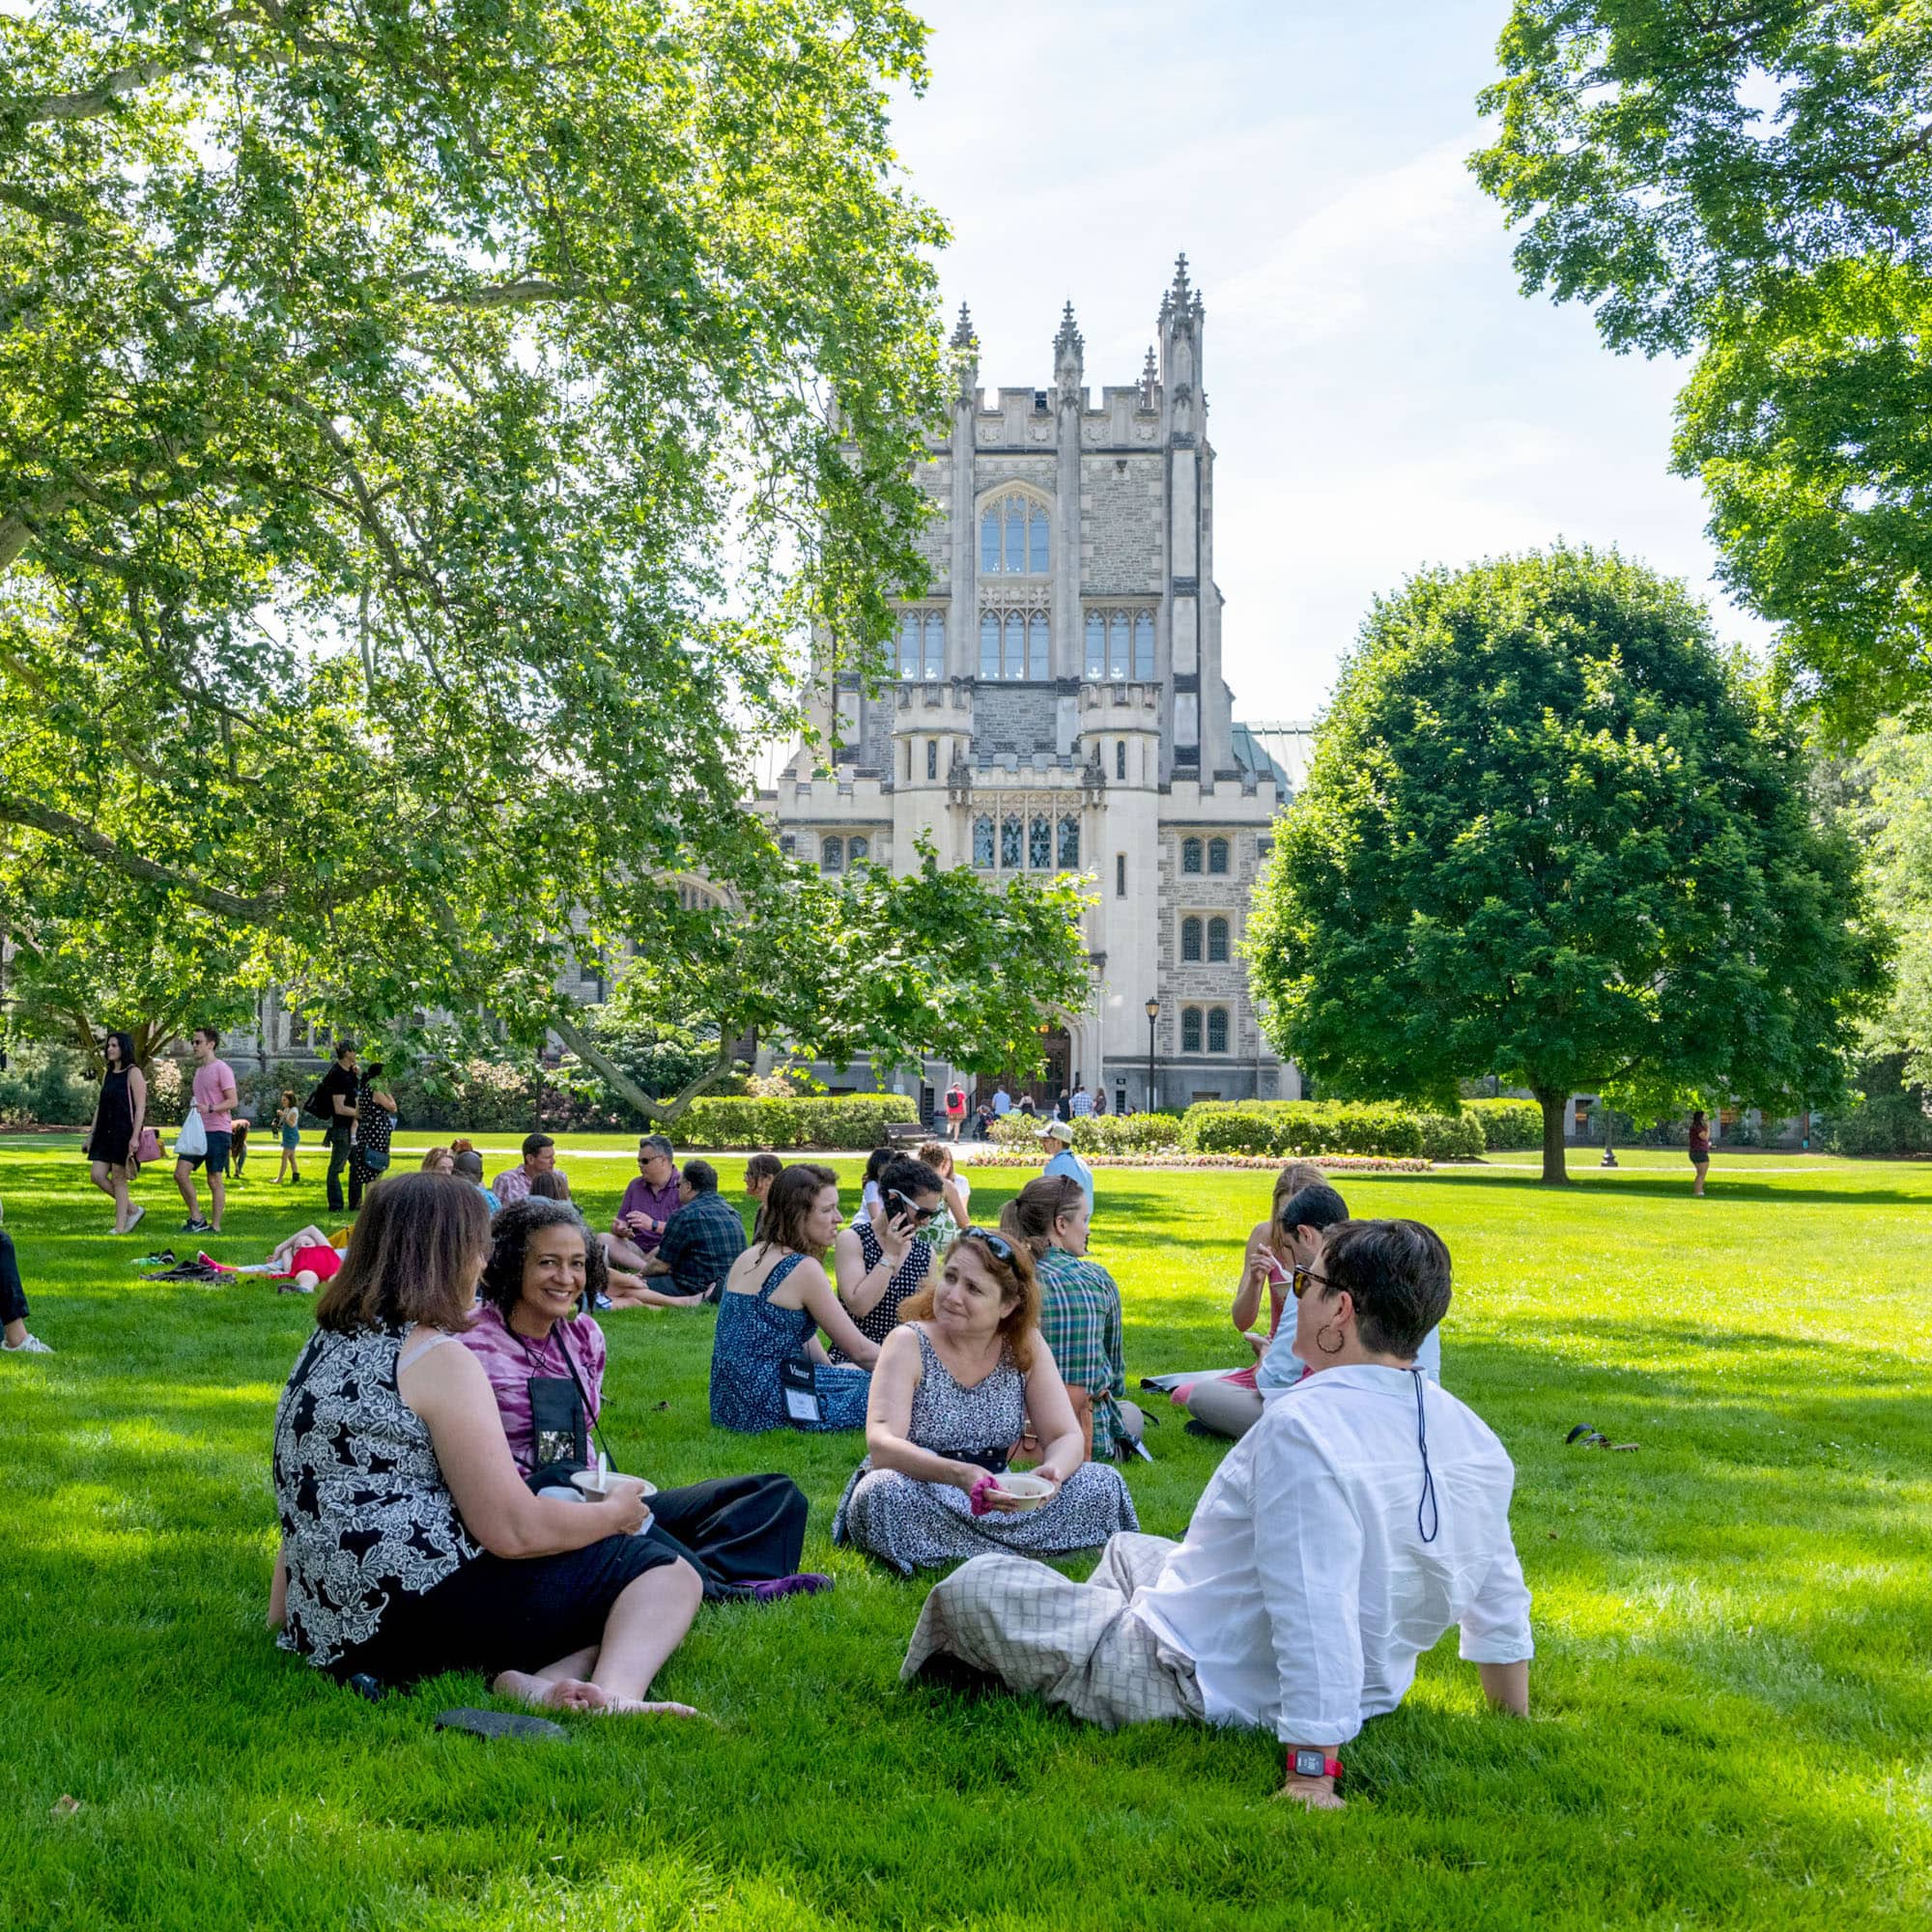 People seated on the lawn in front of Thompson Library, a large, stone building with stained-glass windows and classical architecture, on the Vassar campus.